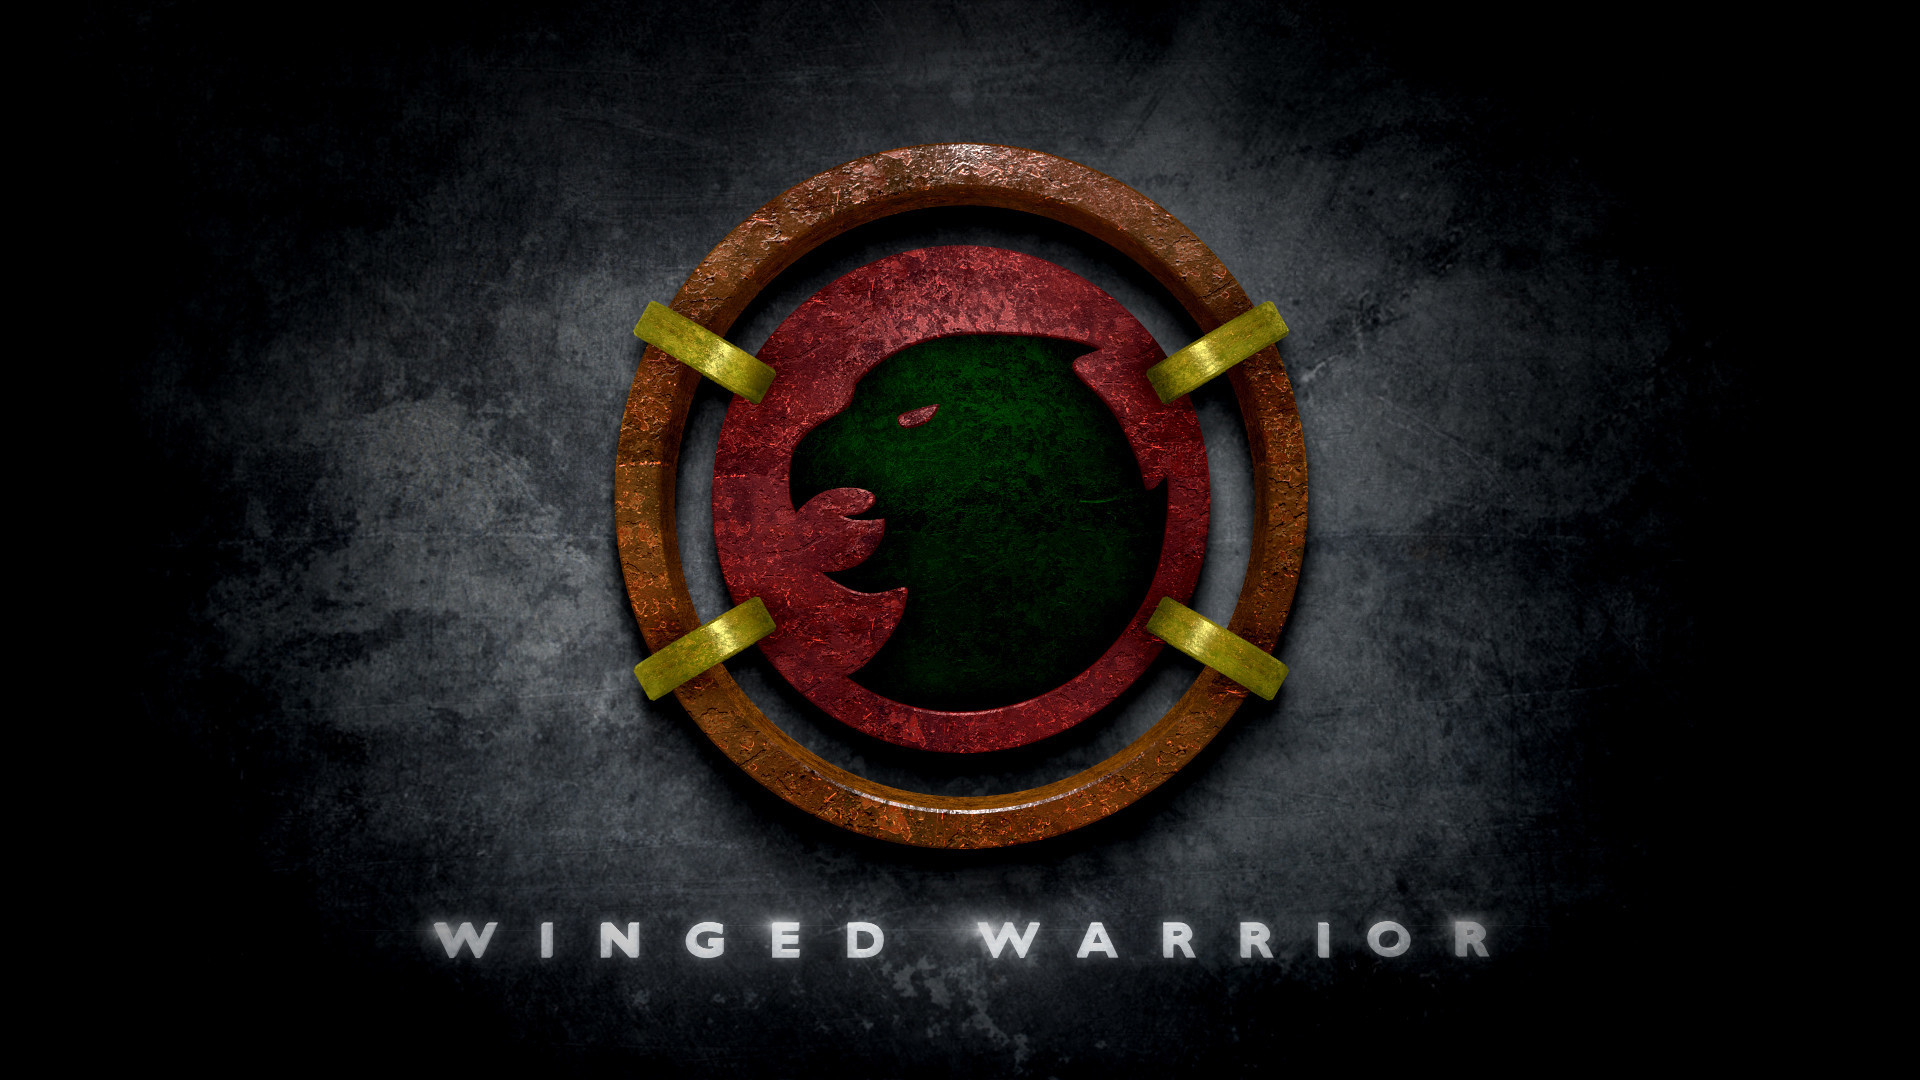 1920x1080 Hawkman - Justice League Logos in the Style of "Man of Steel" - Imgur